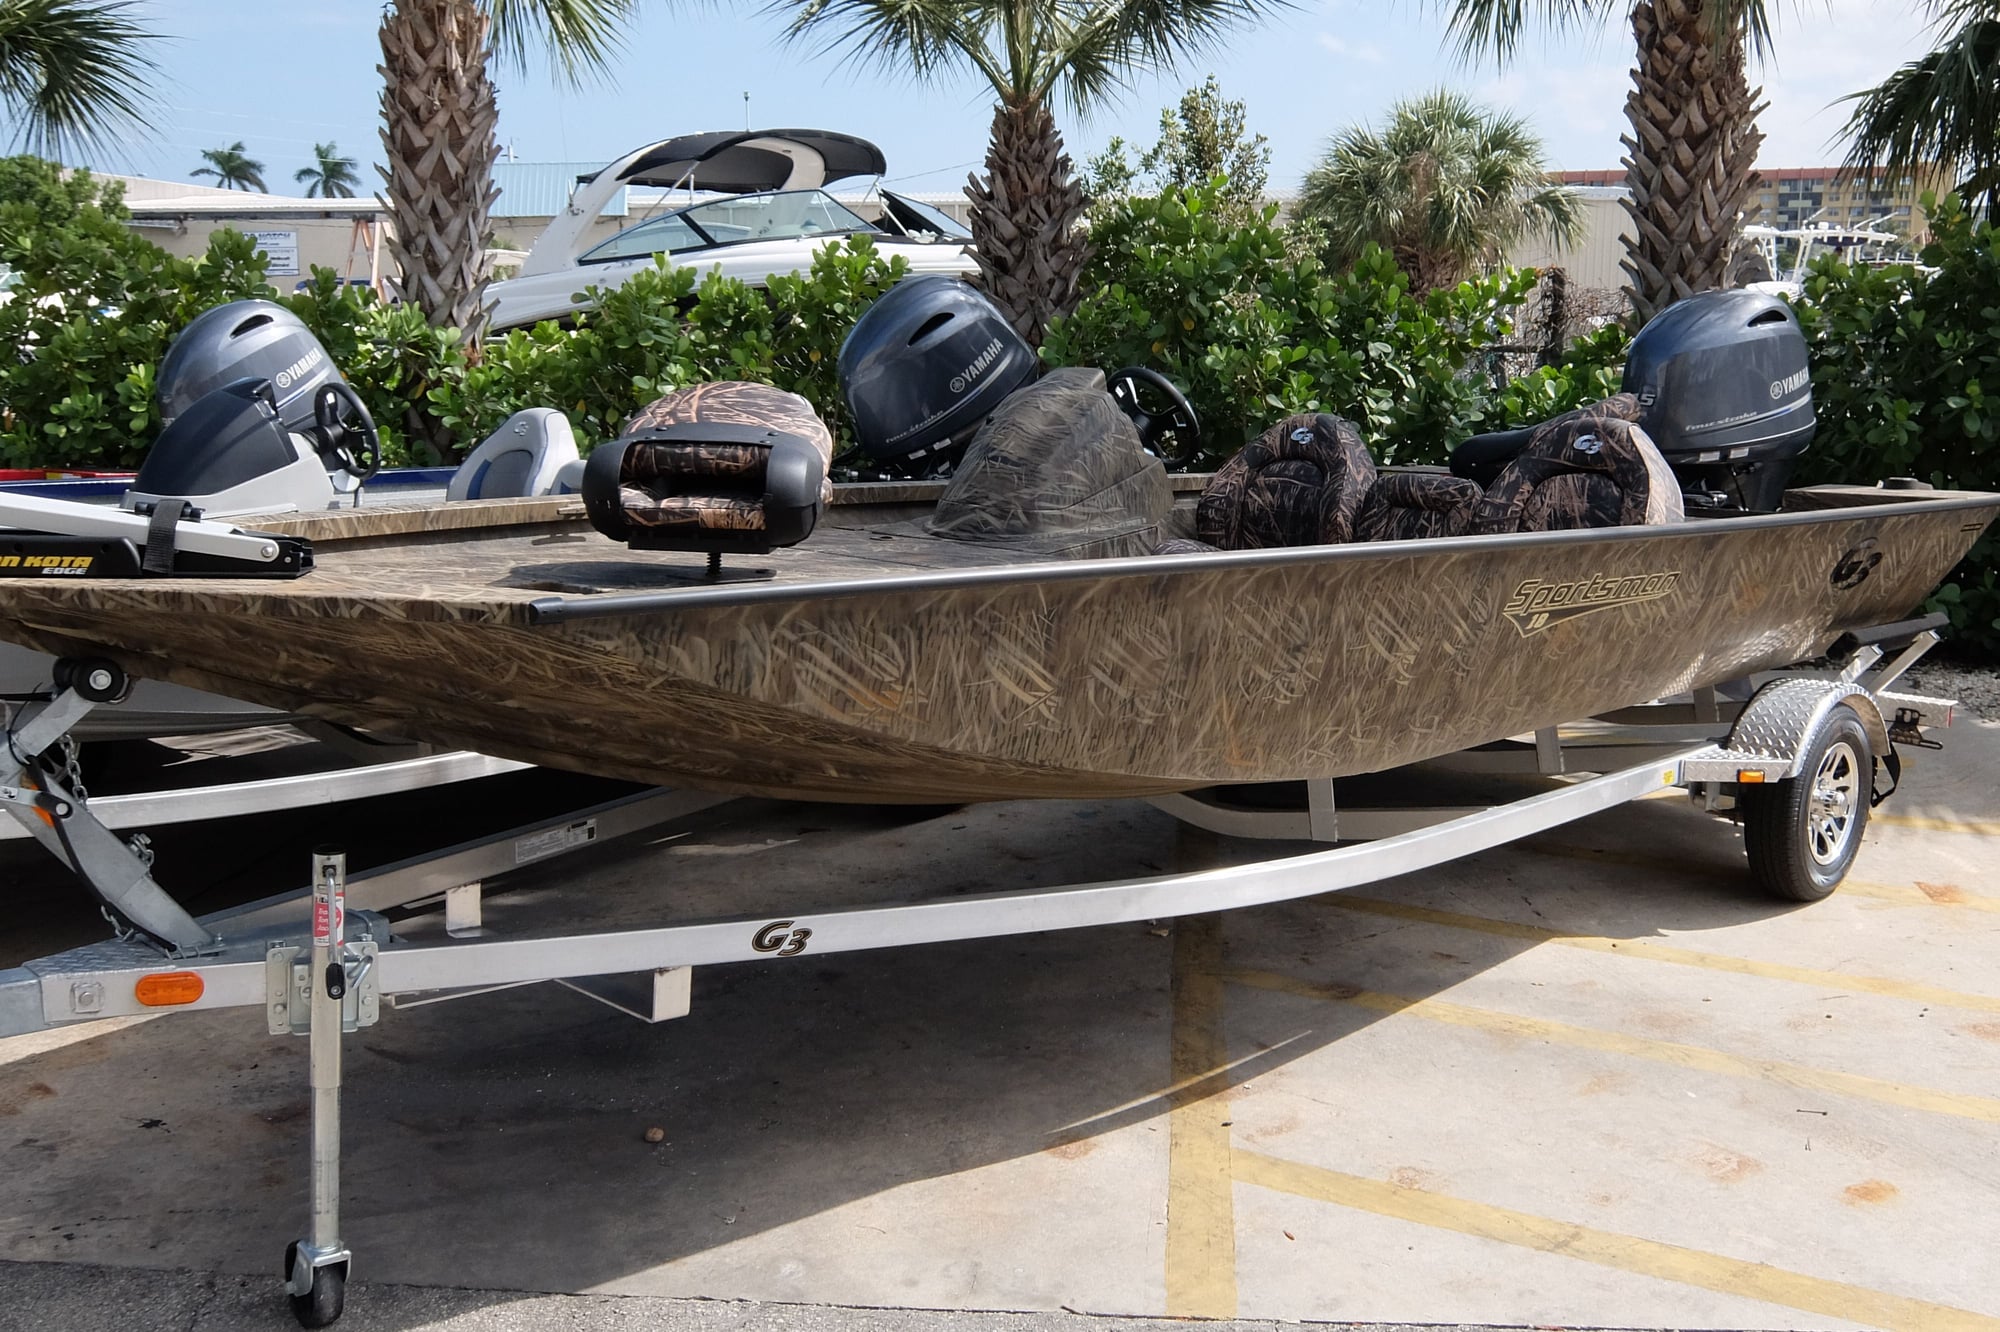 2018 G3 Bass and Bay boats - The Hull Truth - Boating and ...